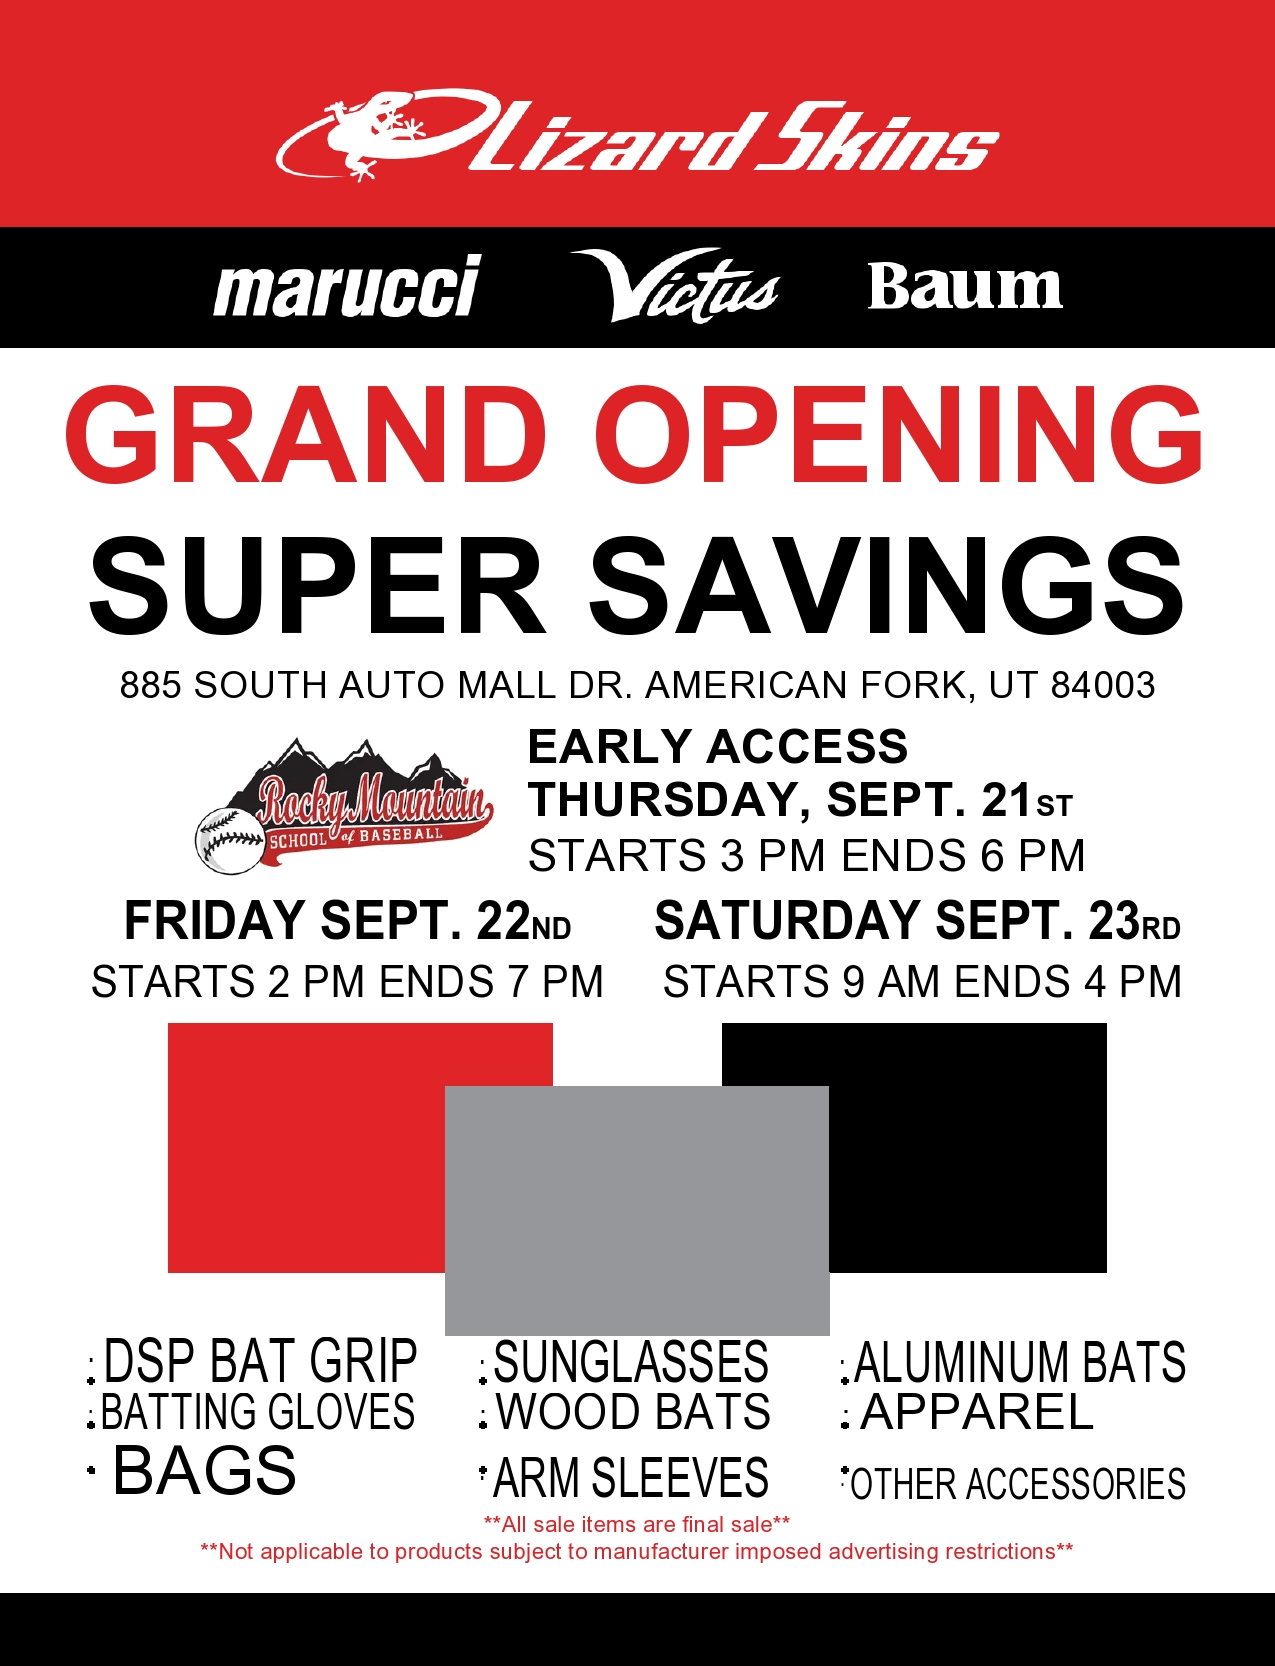 Free grand opening flyer 37